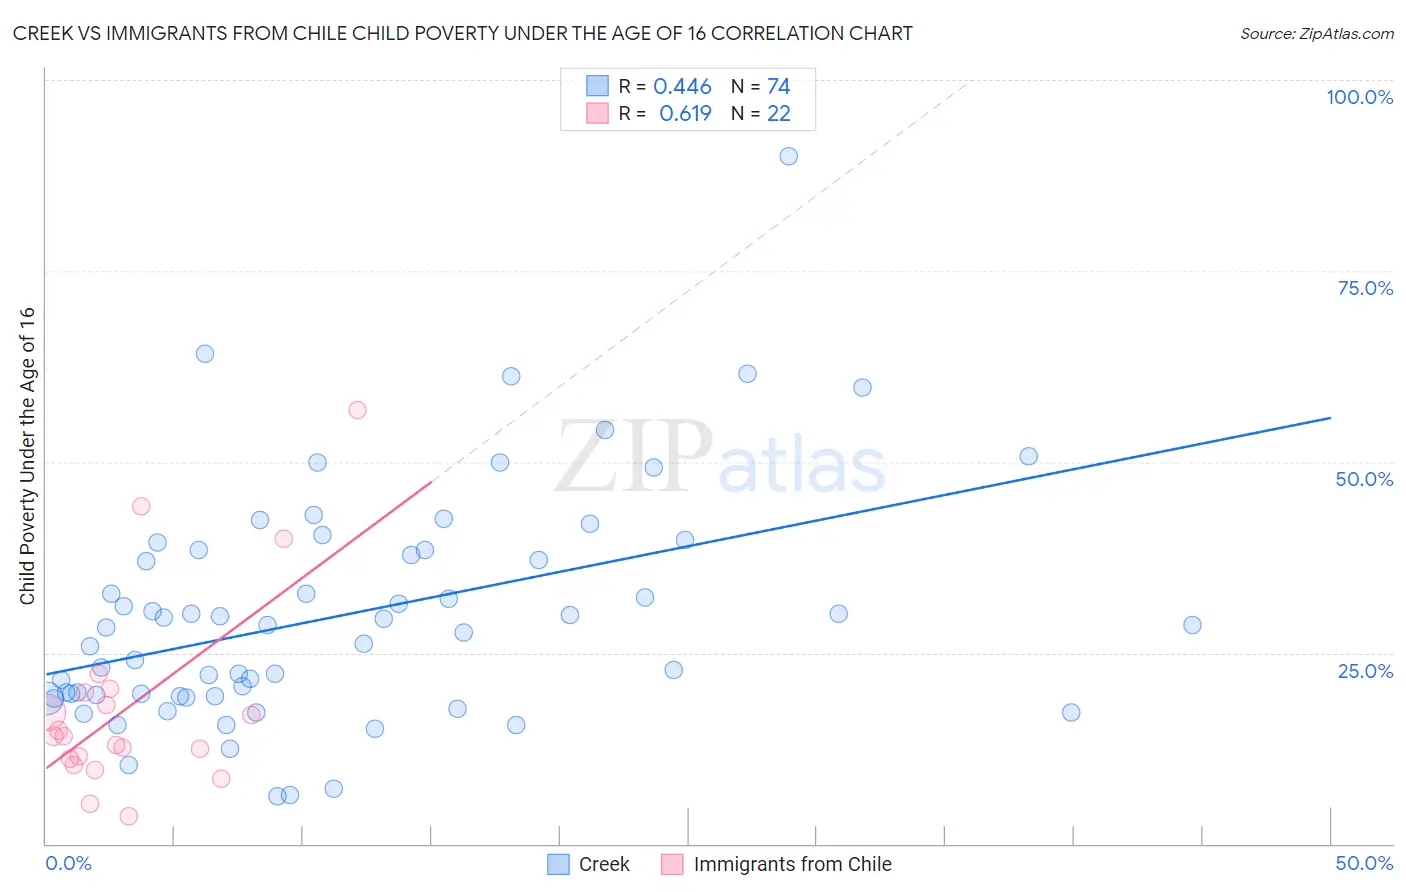 Creek vs Immigrants from Chile Child Poverty Under the Age of 16